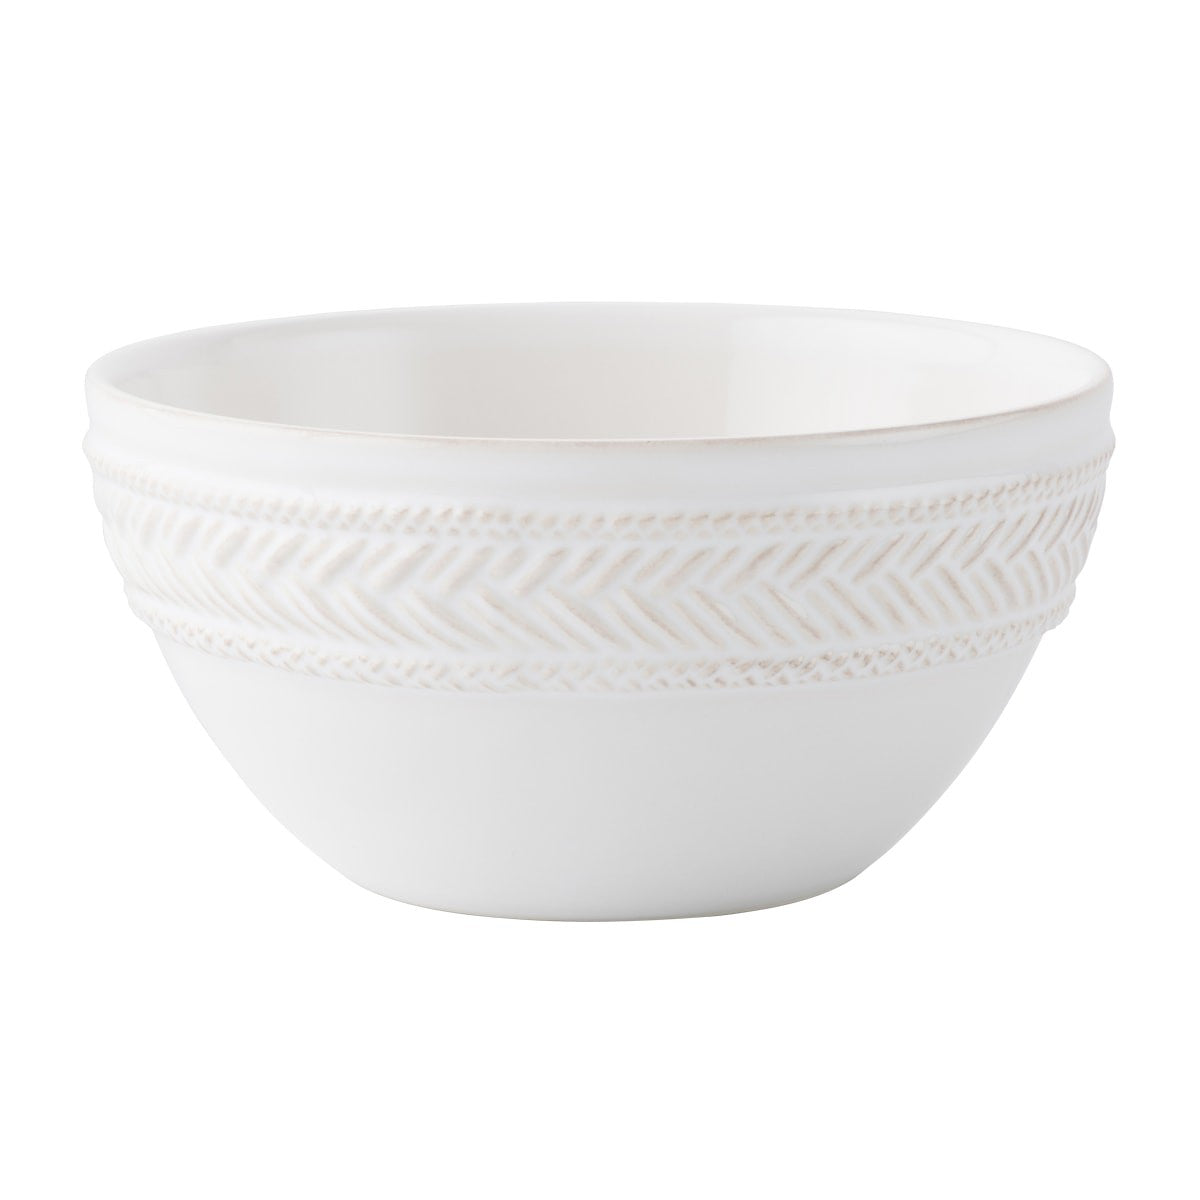 le panier cereal bowl on a white background